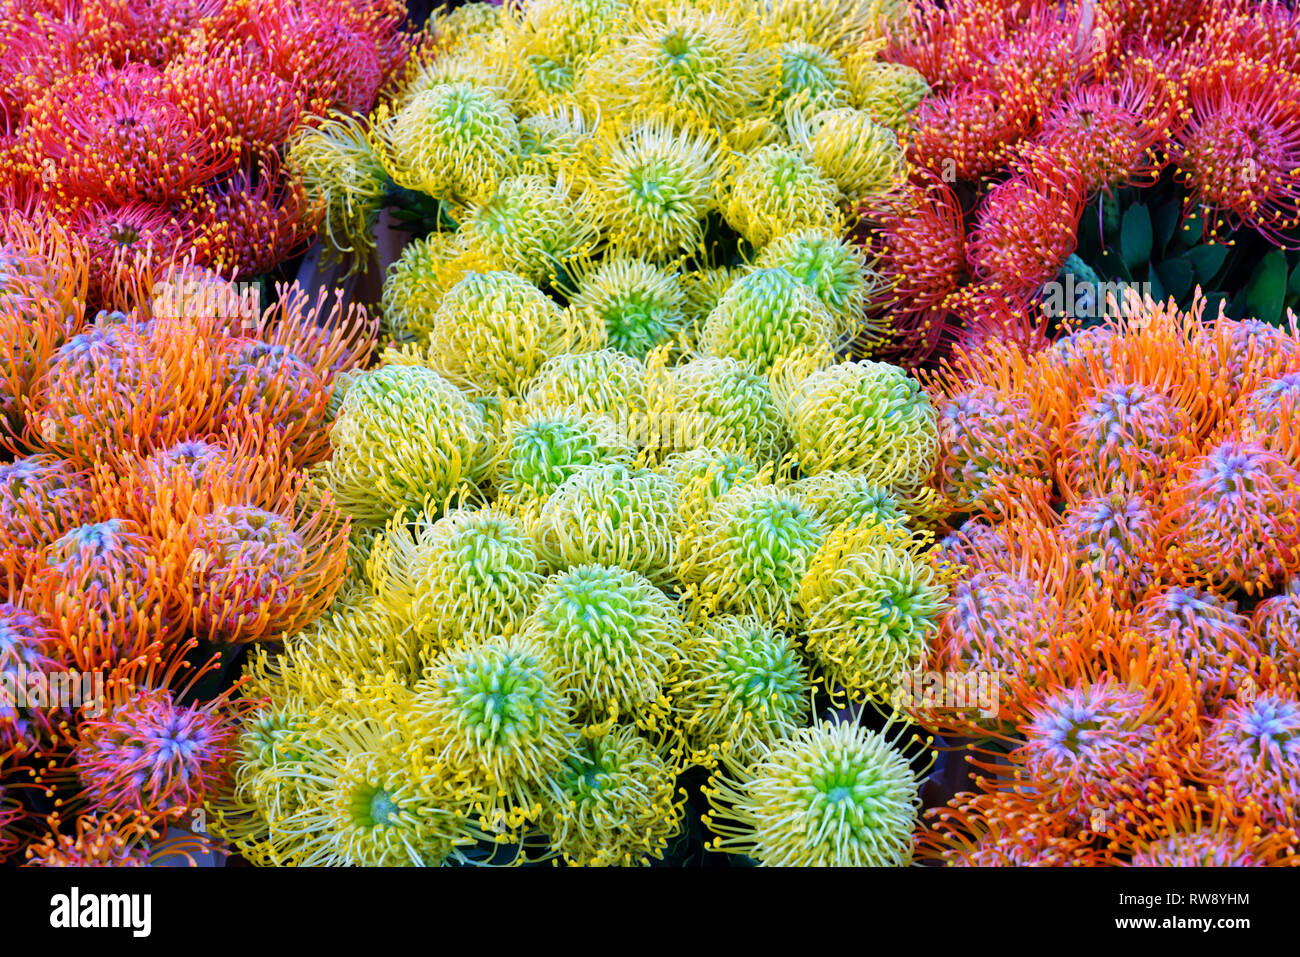 Tropical yellow and orange protea pin flowers (Leucospermum) for sale at a farmers market in Copenhagen Stock Photo